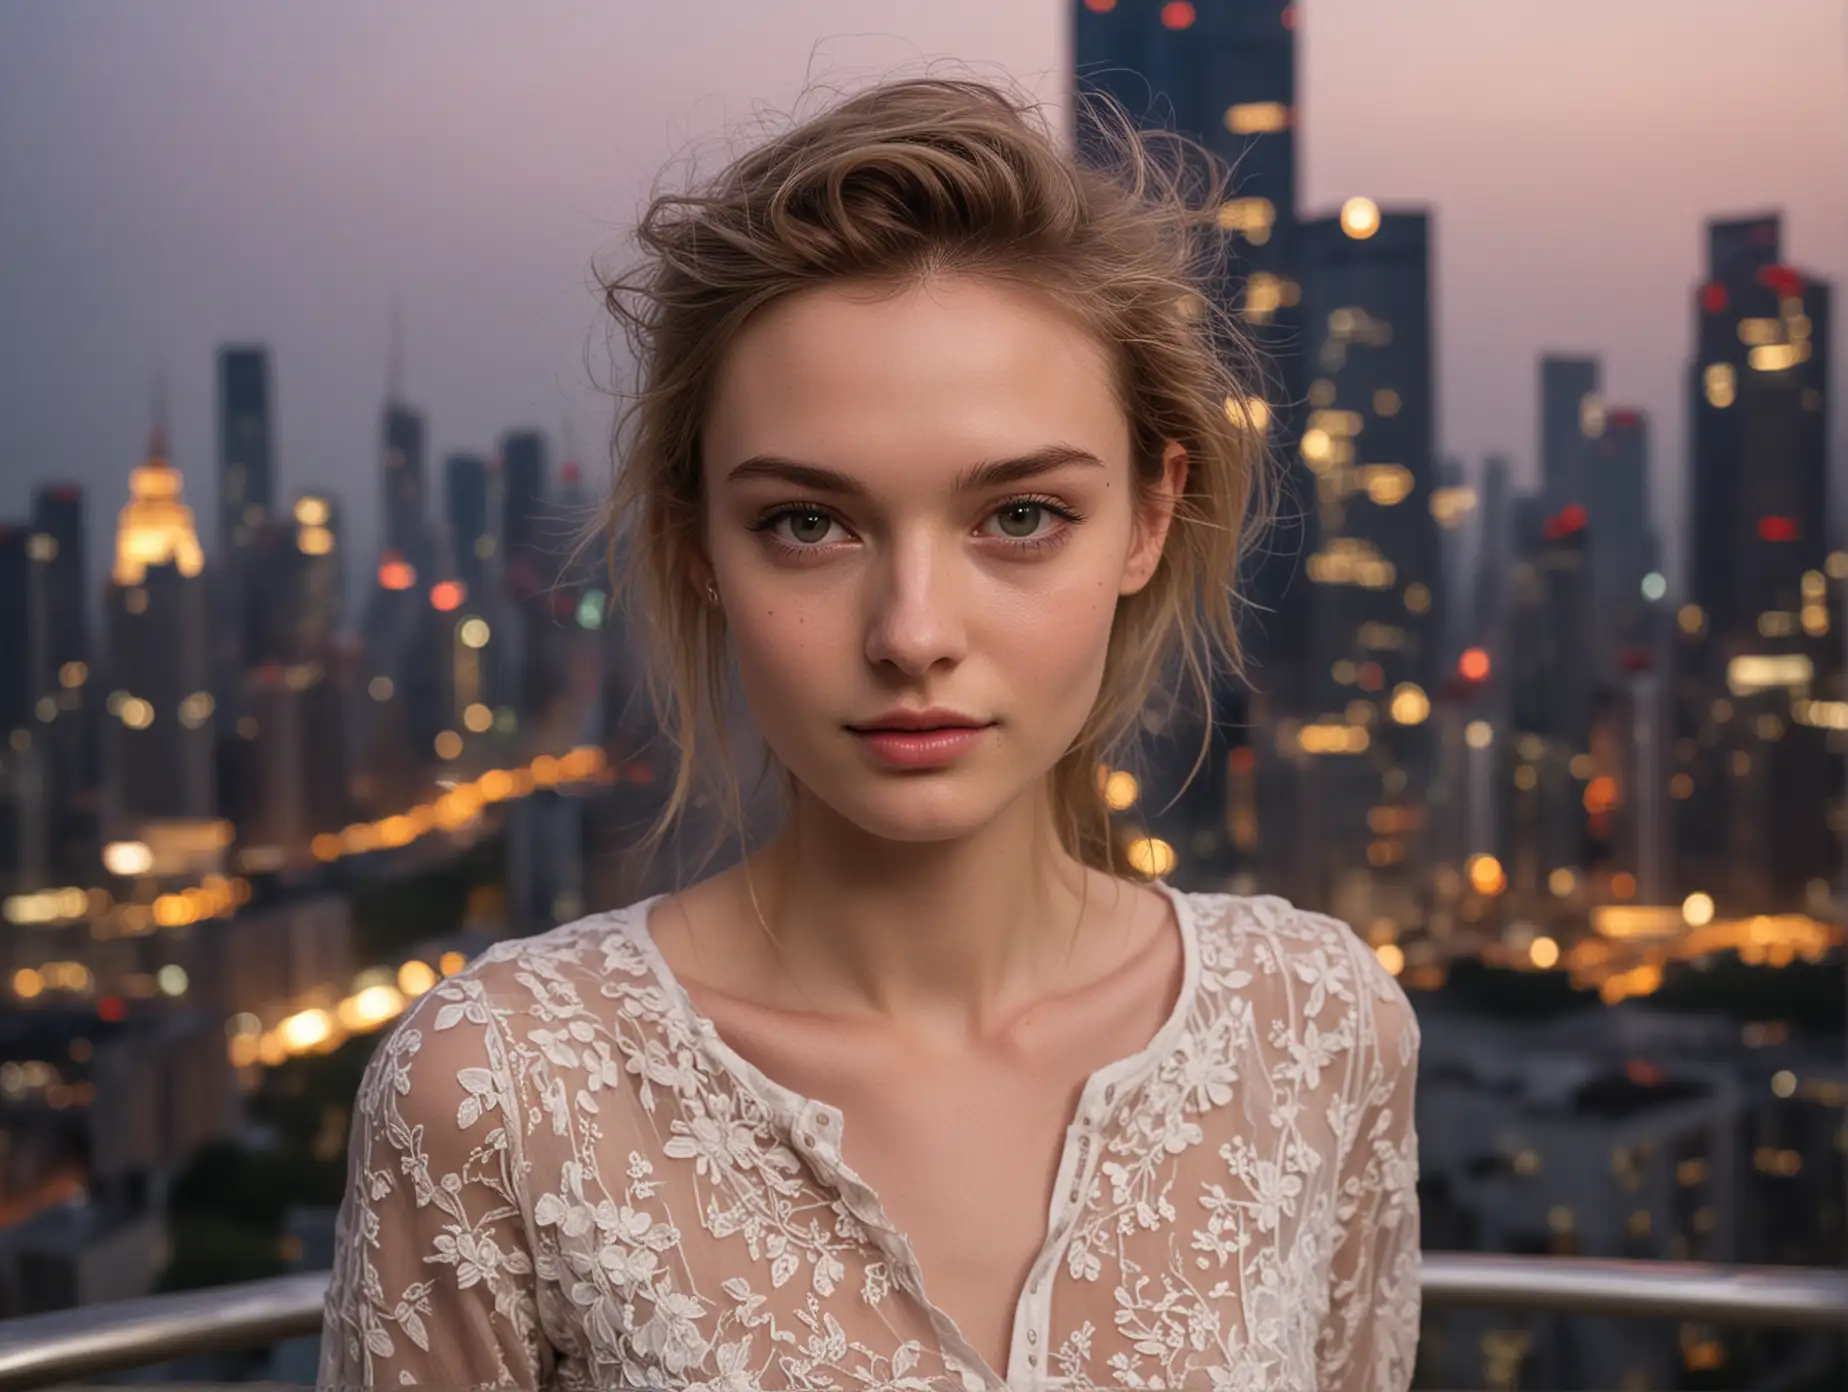 face of an angelic sweet skinny irish fashion model at a party at dusk in a luxury high rise in shanghai. she has a sweet kind face and soulful intelligent eyes.